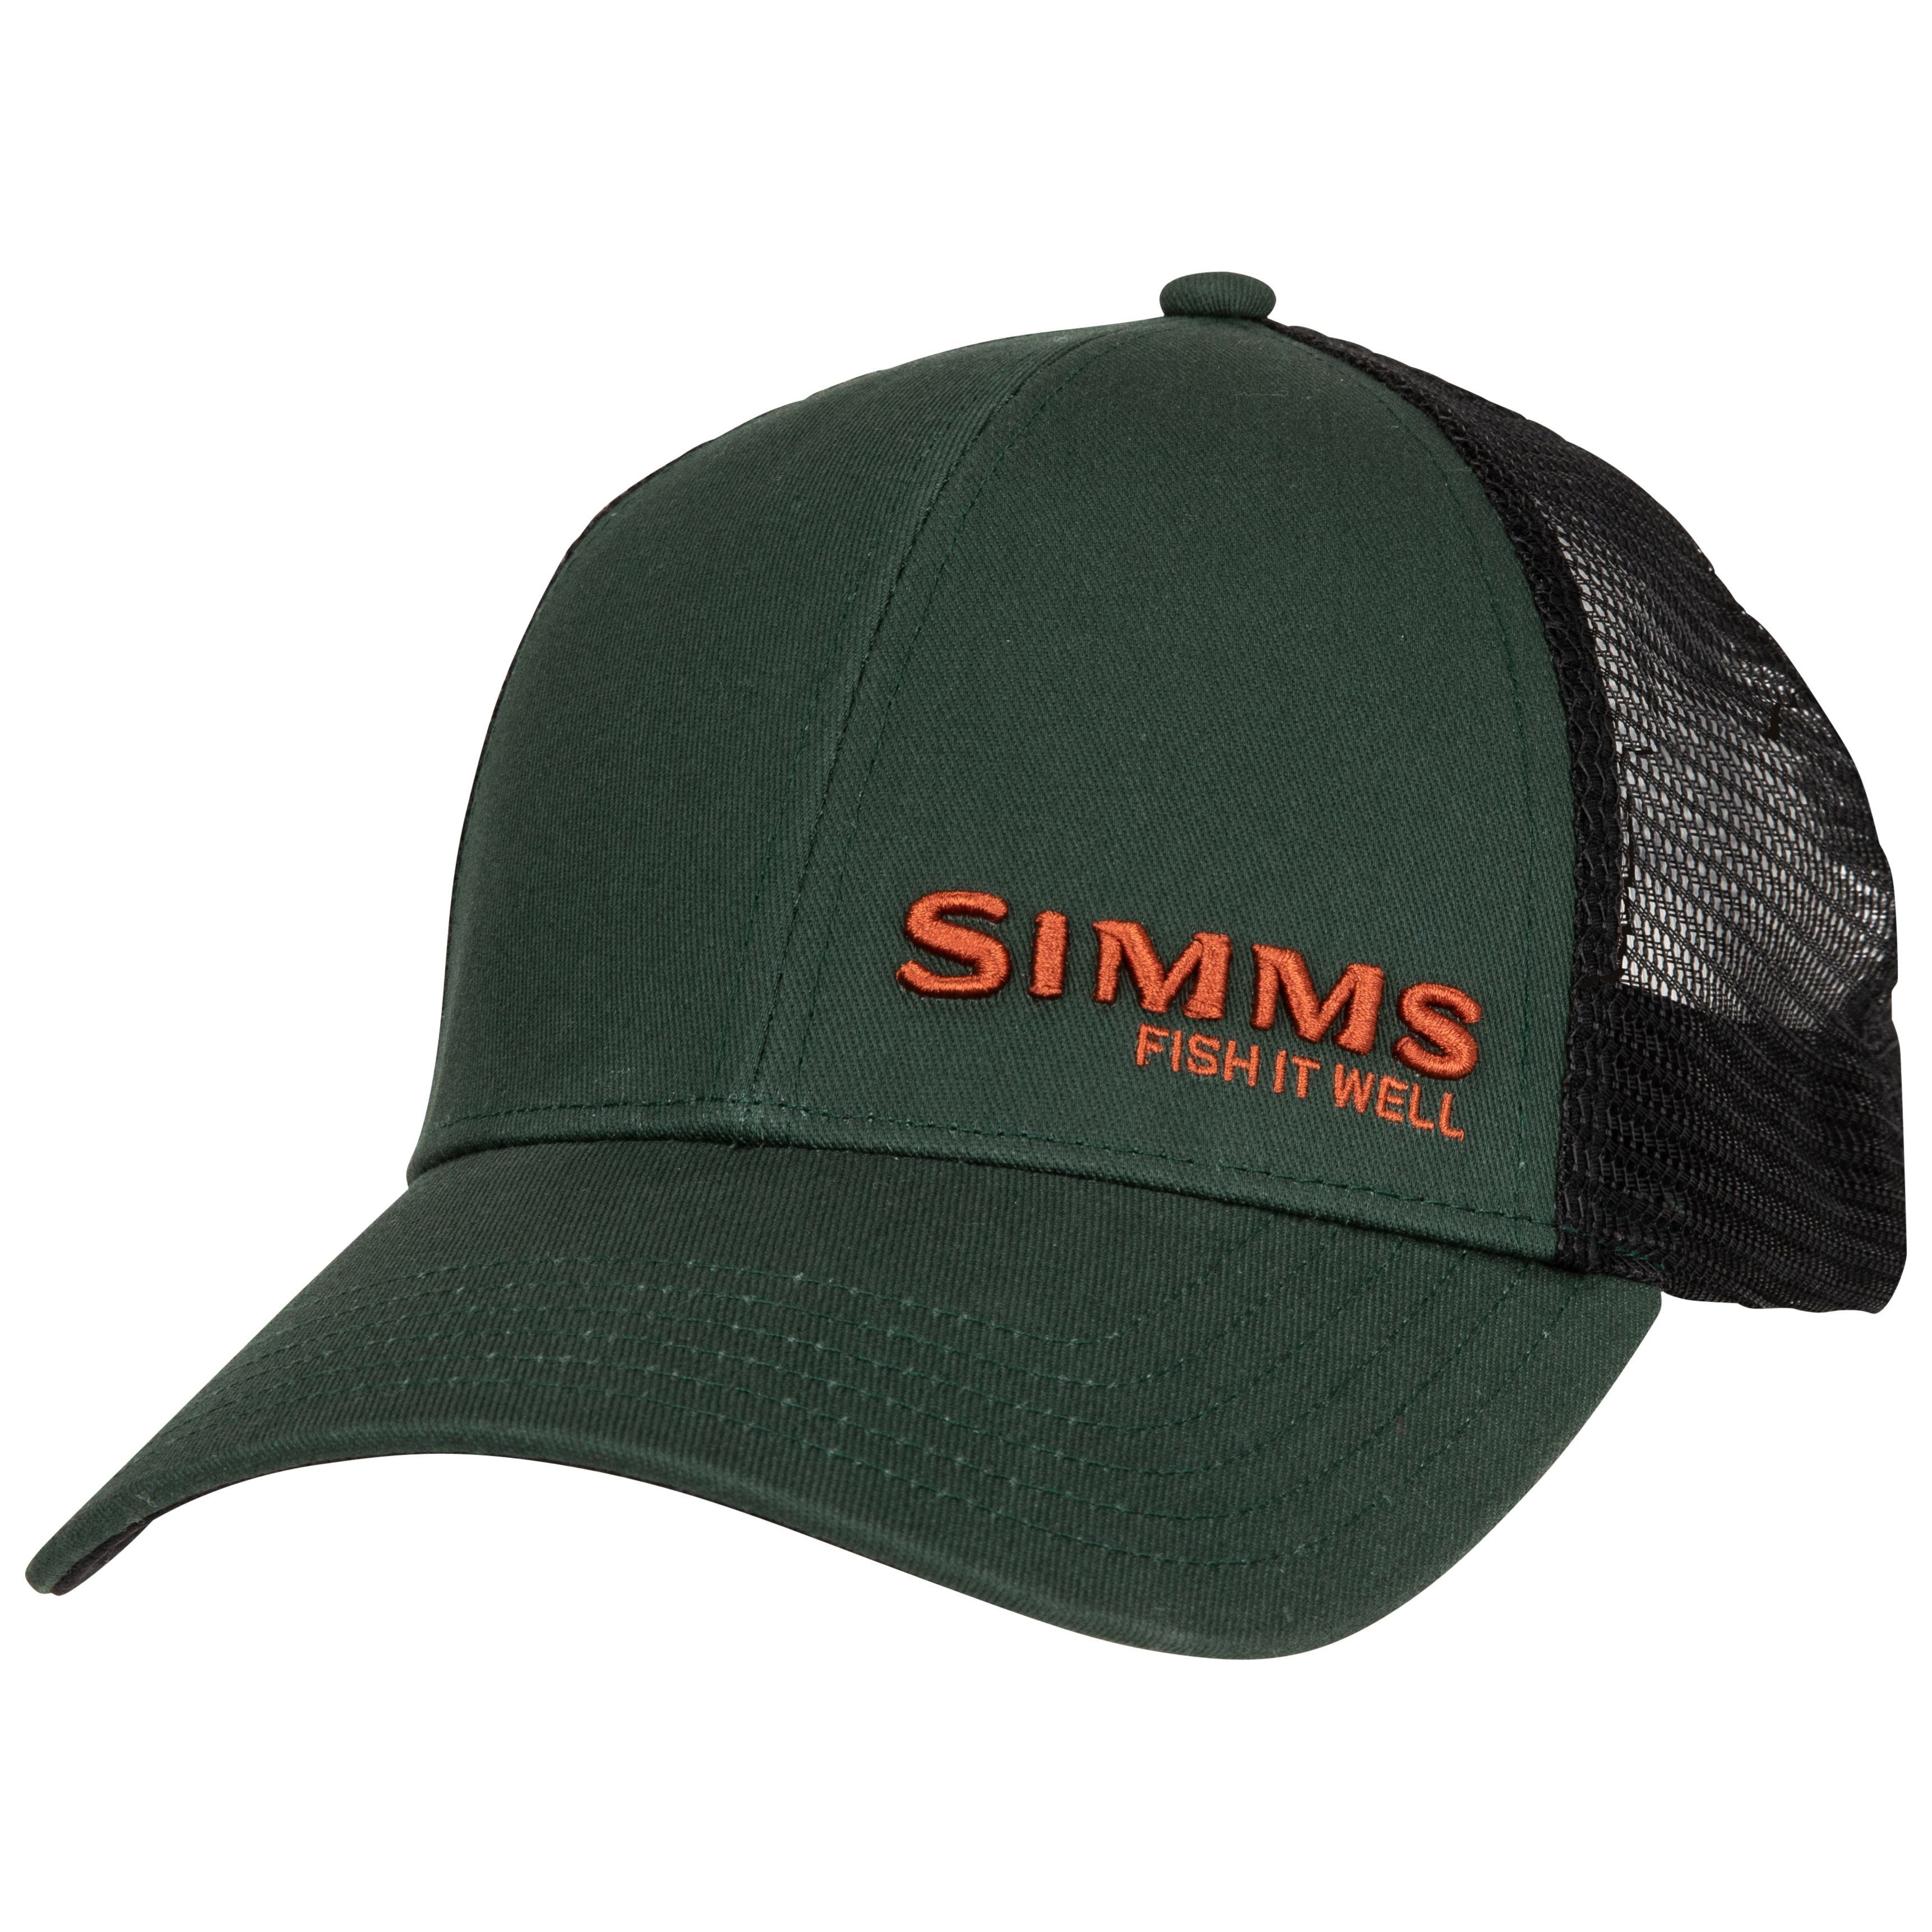 Simms Fish It Well Forever Trucker Foliage Image 01